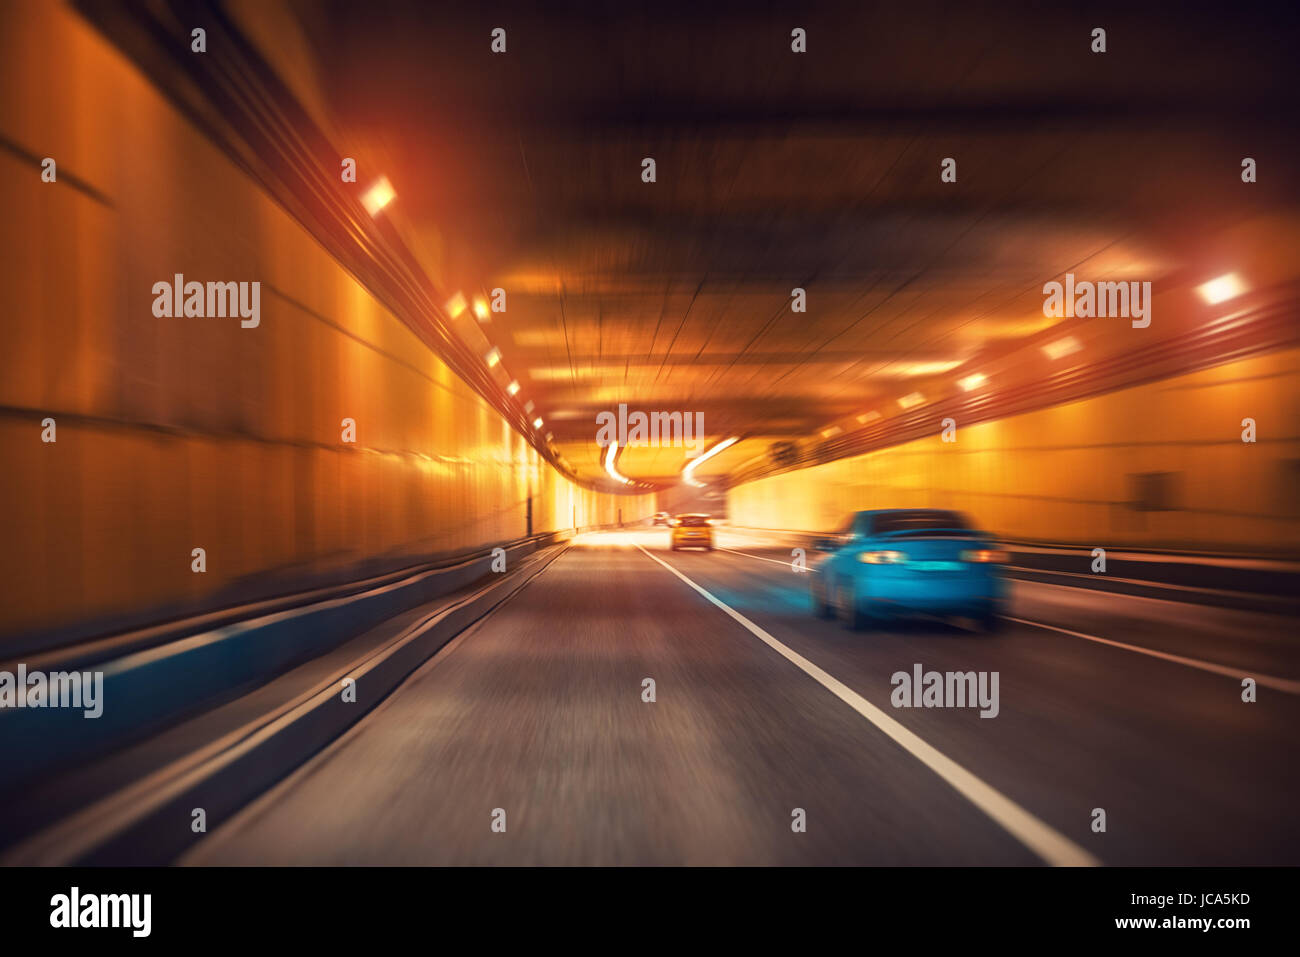 Underground modern highway tunnel with several cars. Fast blurred motion effect. Stock Photo